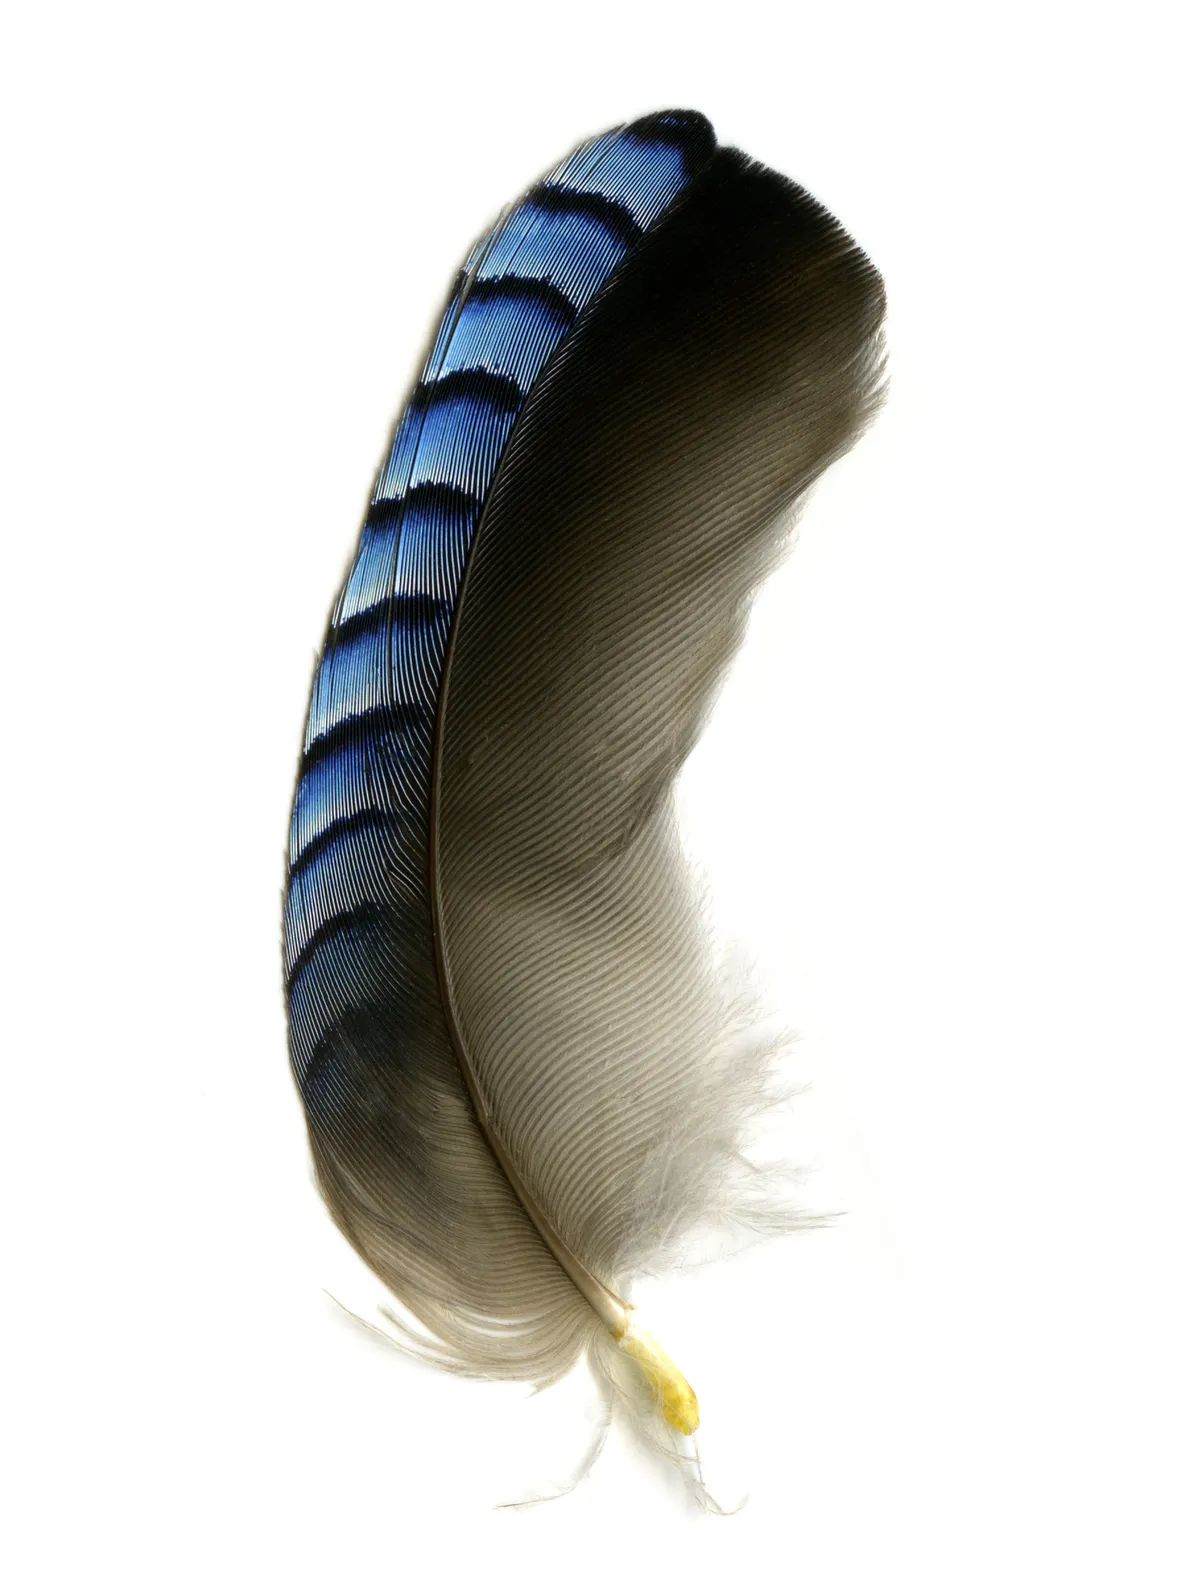 Jay feather that is half black-grey and half blue and white striped